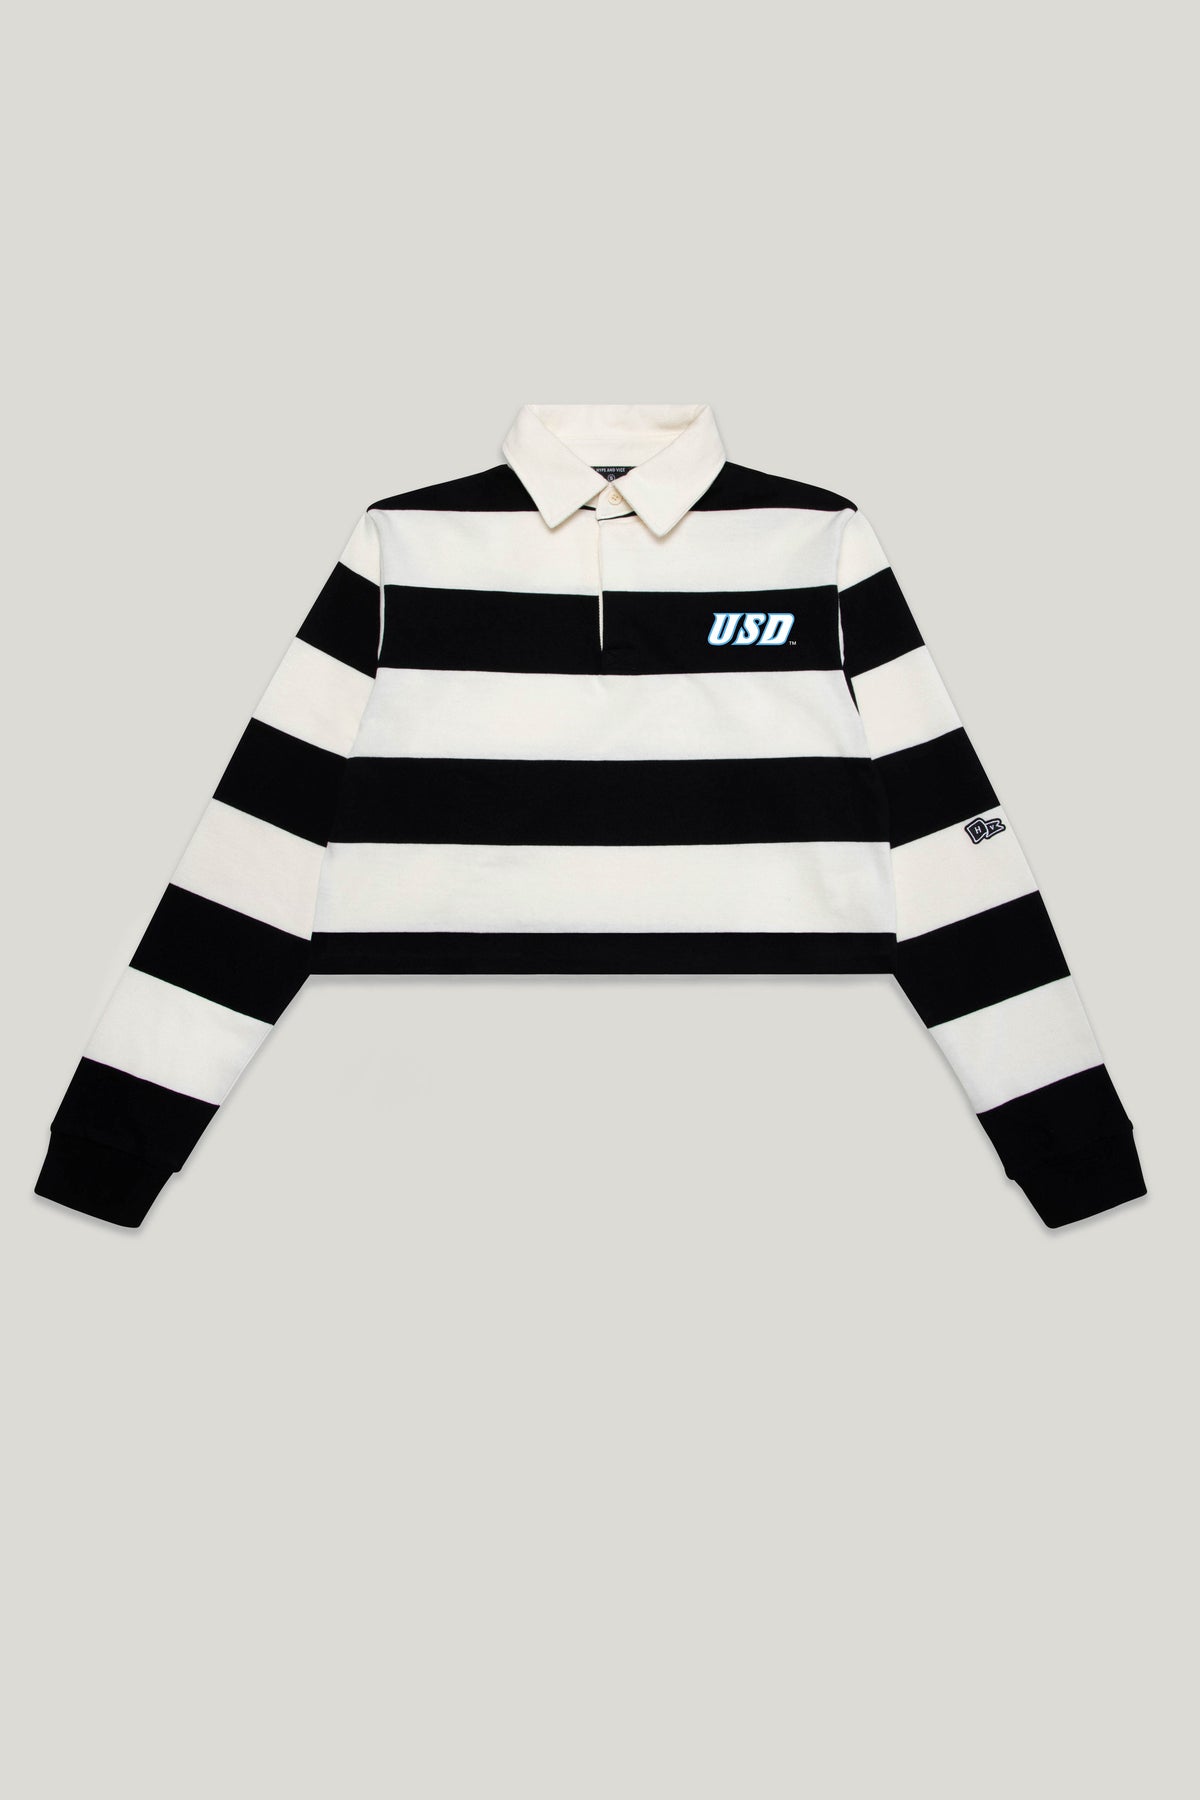 USD Rugby Top